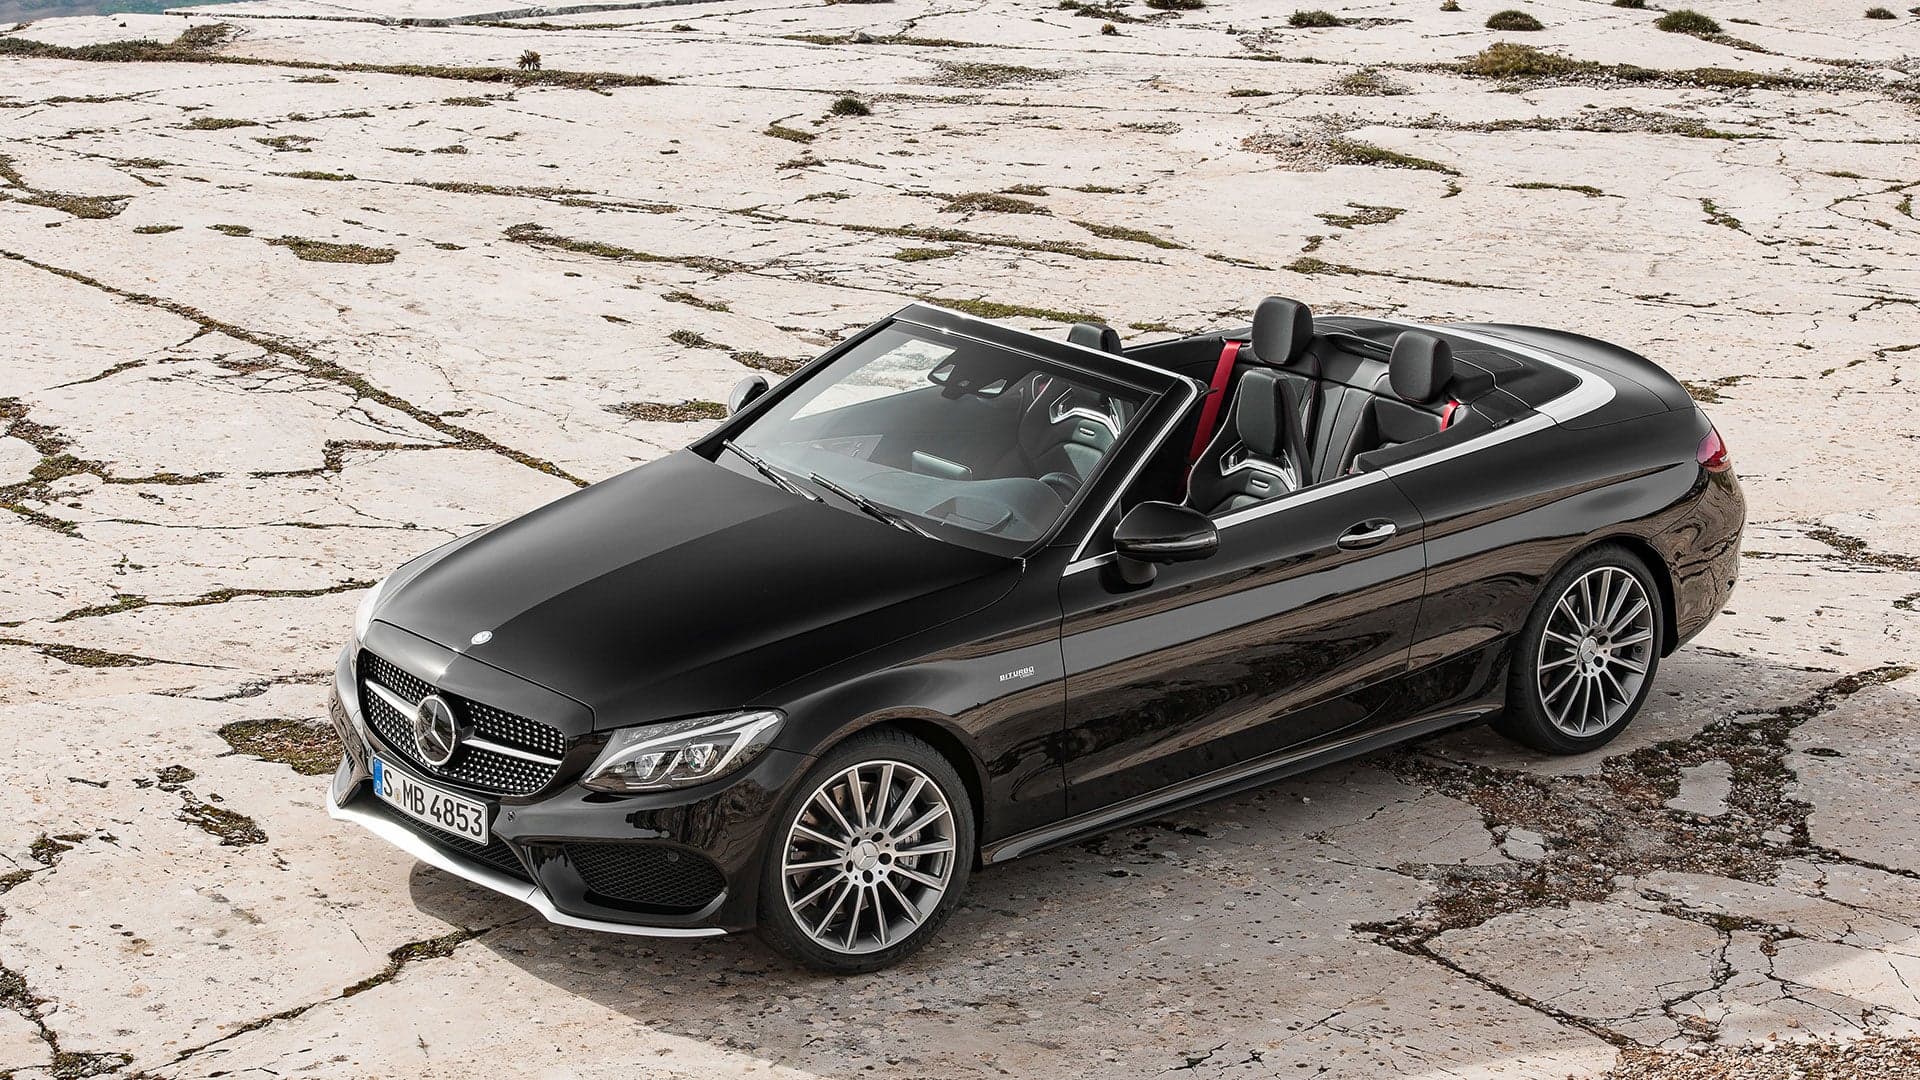 2017 Mercedes-Benz C-Class Cabrio Is Elegance Writ Small